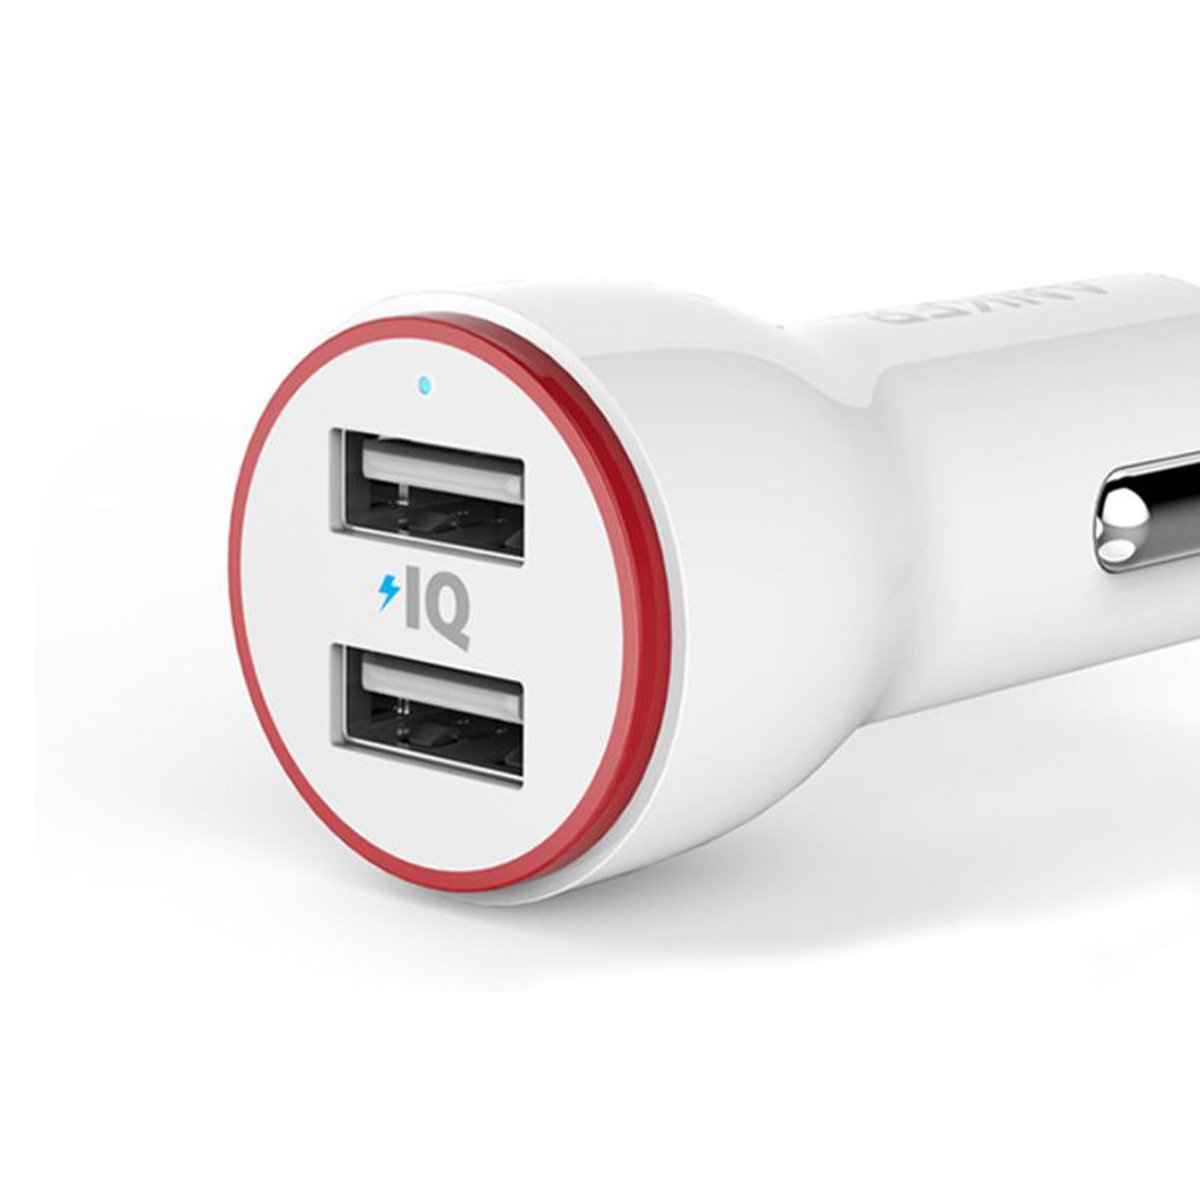 Anker USB Car Charger A2310 White